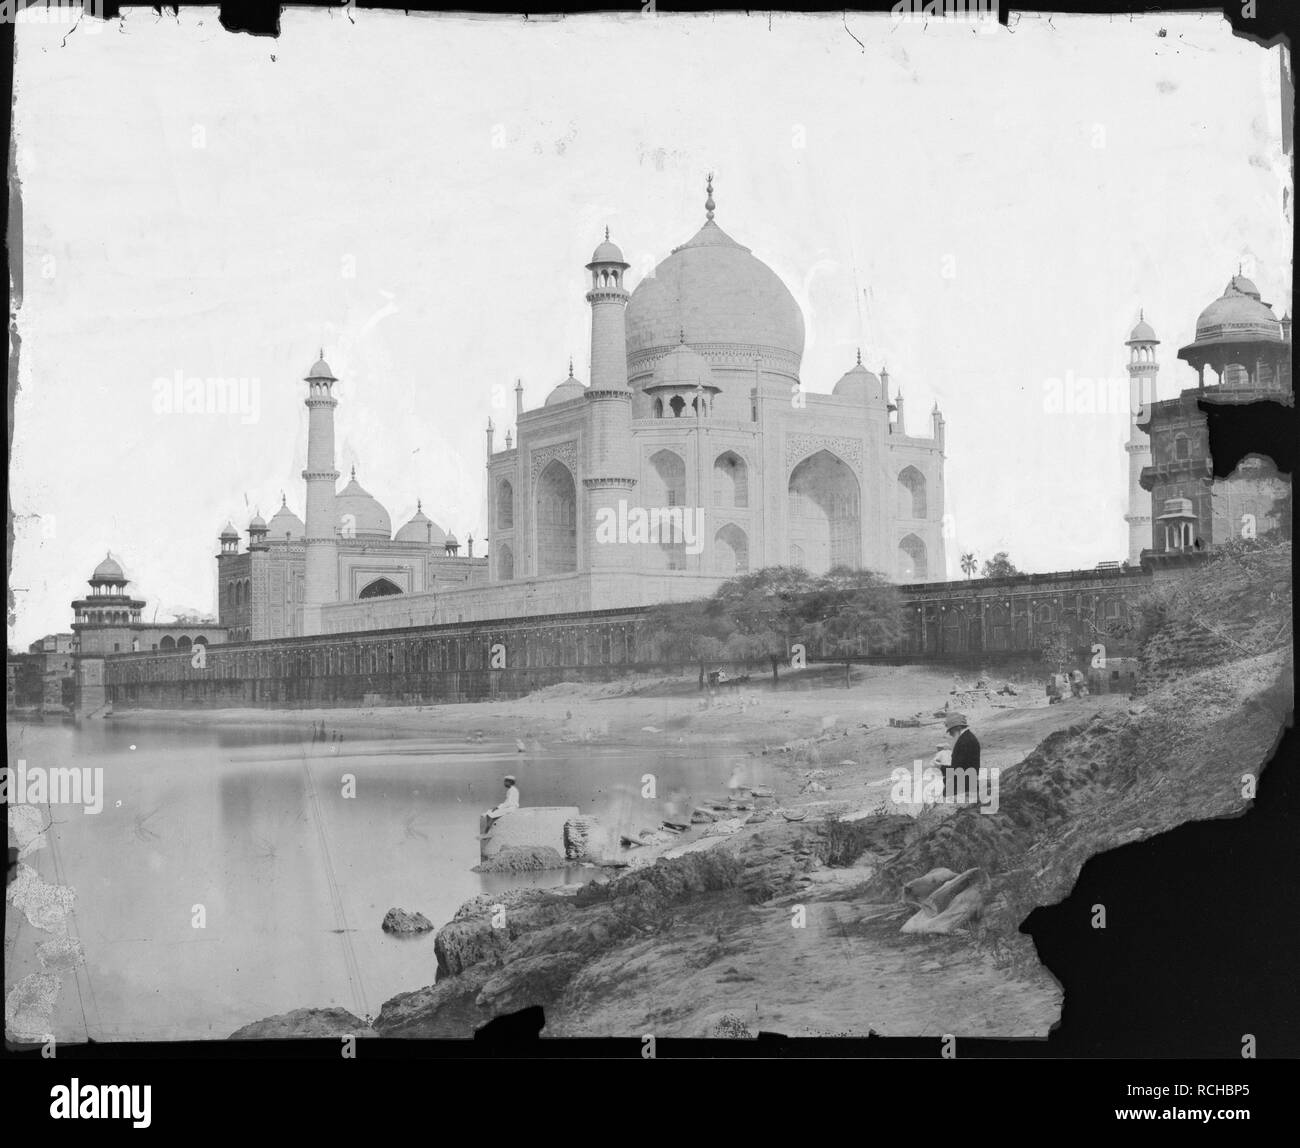 The Taj Mahal. John Murray Collection: Views mostly in Agra and i. India, early 1860s. A view of the Taj Mahal from the banks of the Jumna river, Agra.  Image taken from John Murray Collection: Views mostly in Agra and its environs.  Originally published/produced in India, early 1860s. . Source: OIOC Photo 35/(1),. Author: Murray, Dr. John. Stock Photo